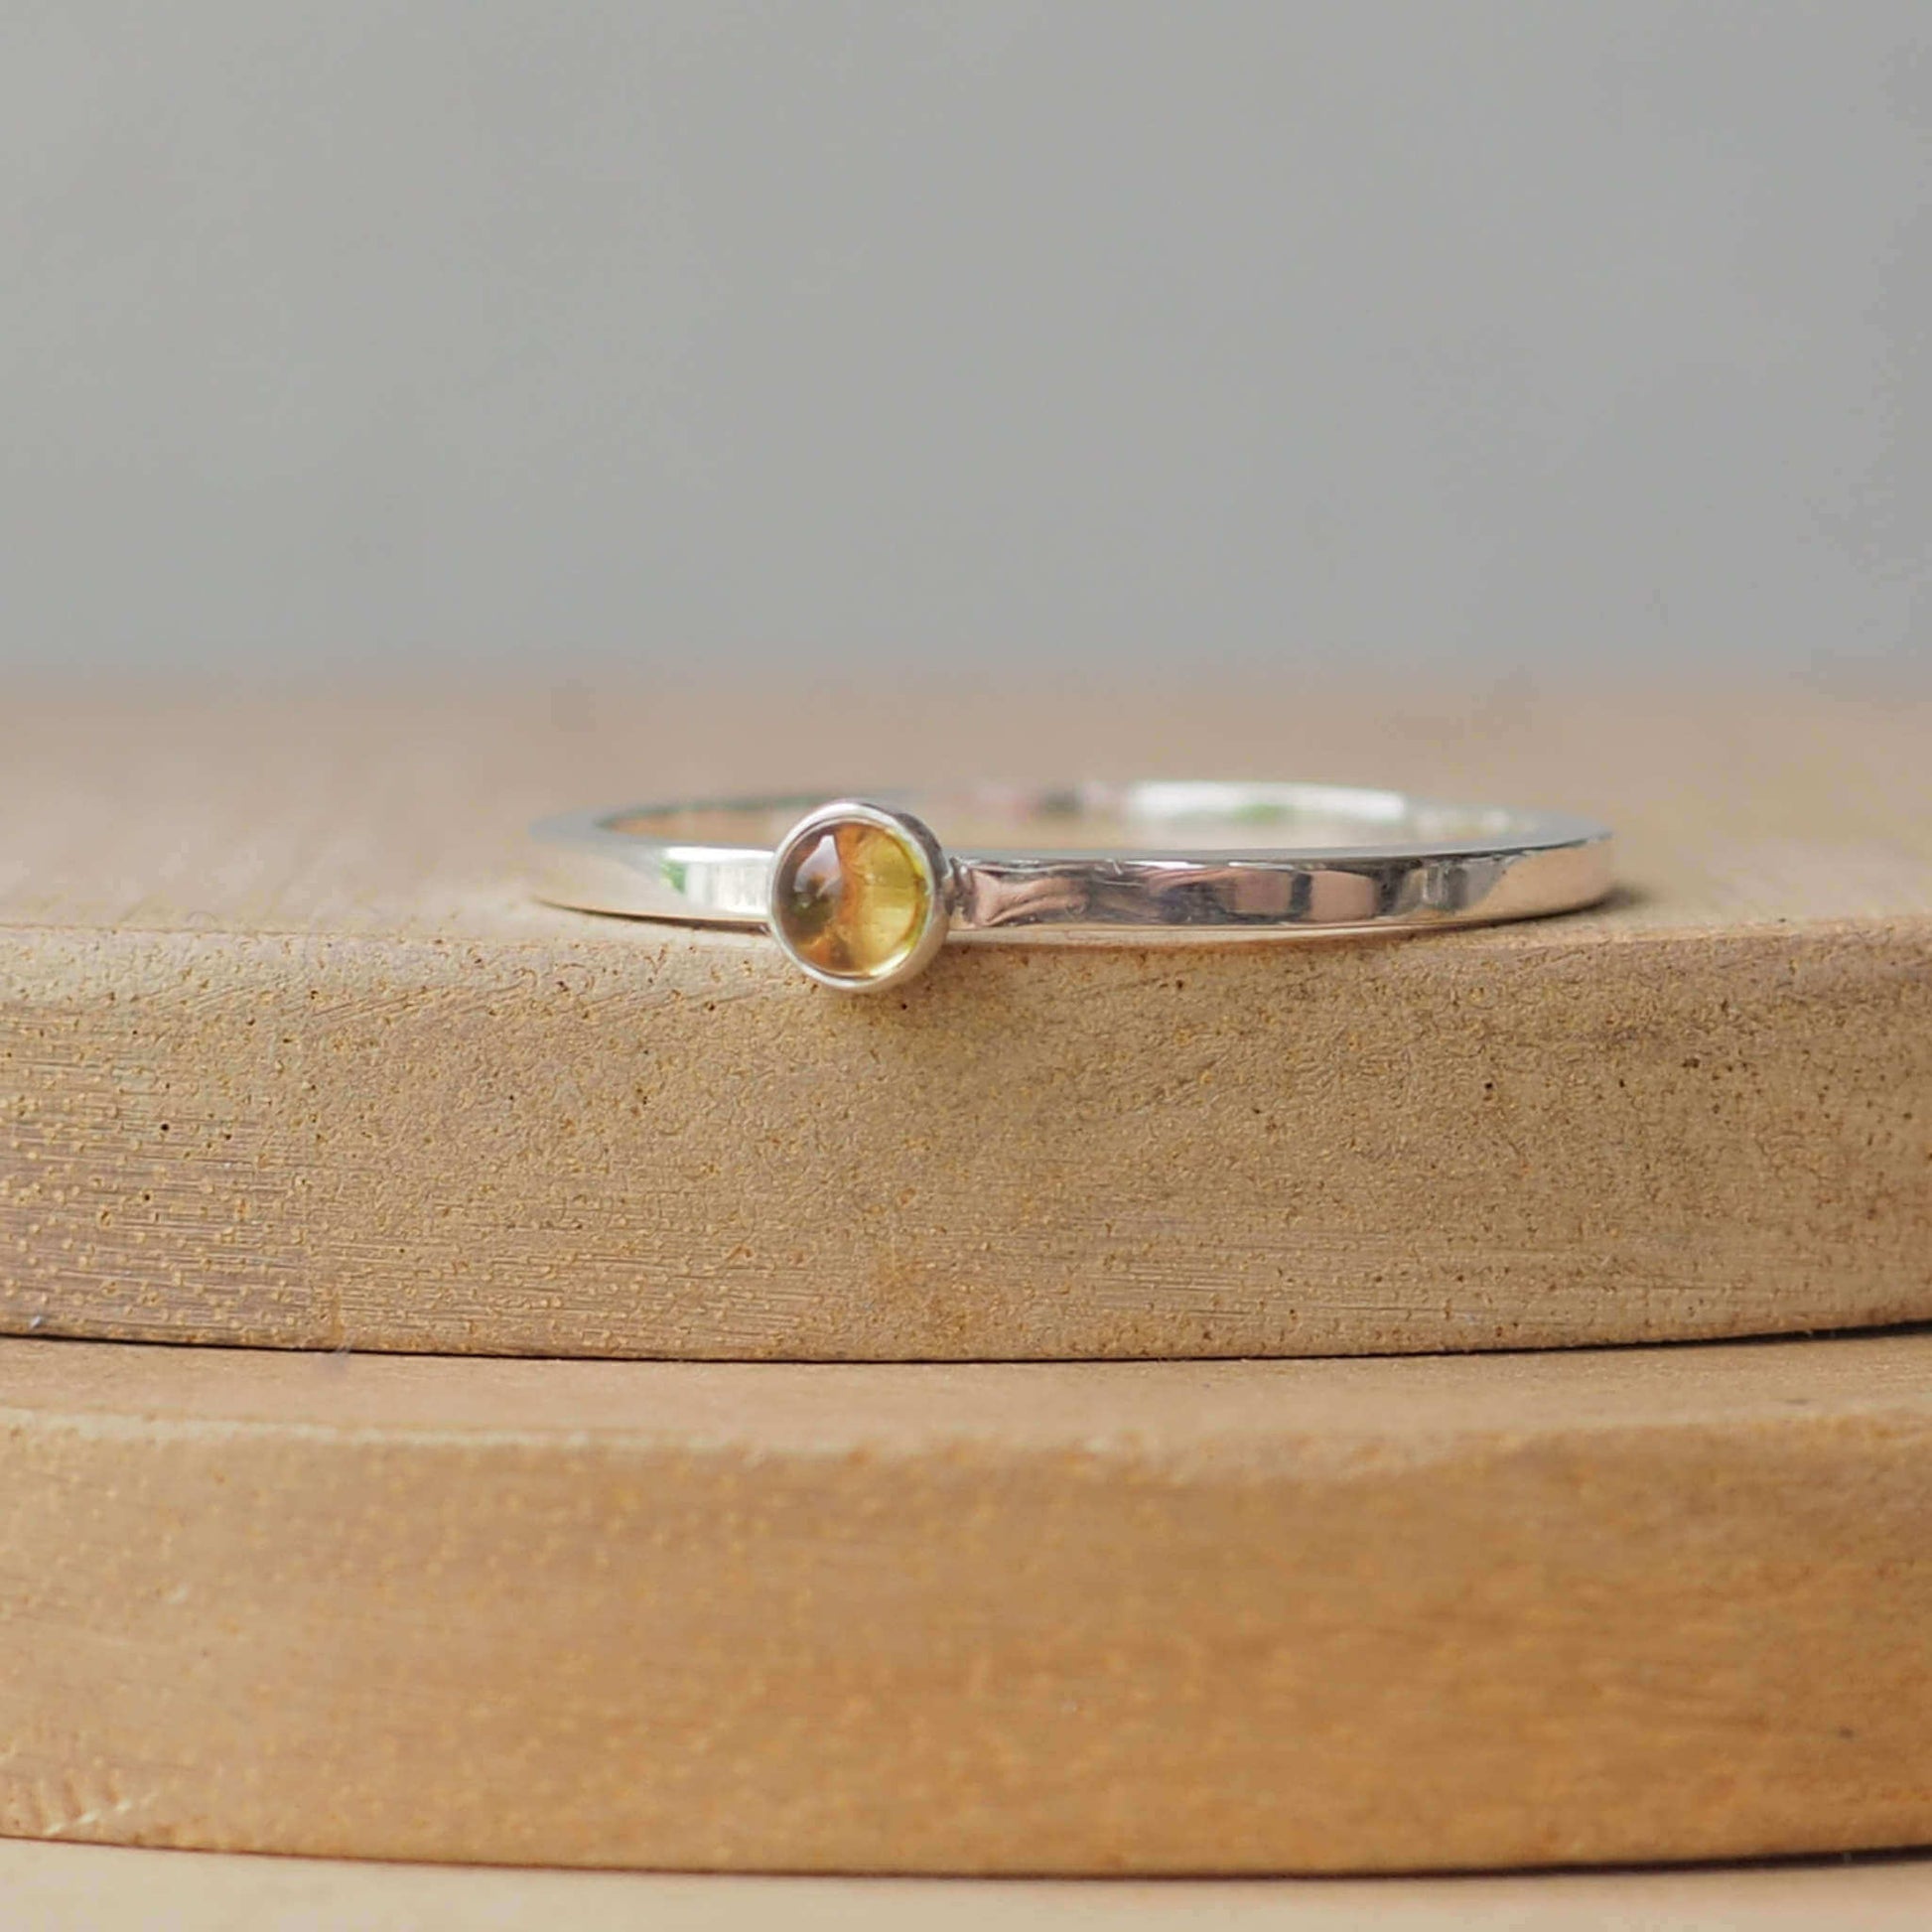 Citrine and Sterling Silver Ring made from a small 3mm round warm yellow citrine gemstone set simply onto a modern band of square wire. Handmade to your ring size by maram jewellery in Scotland